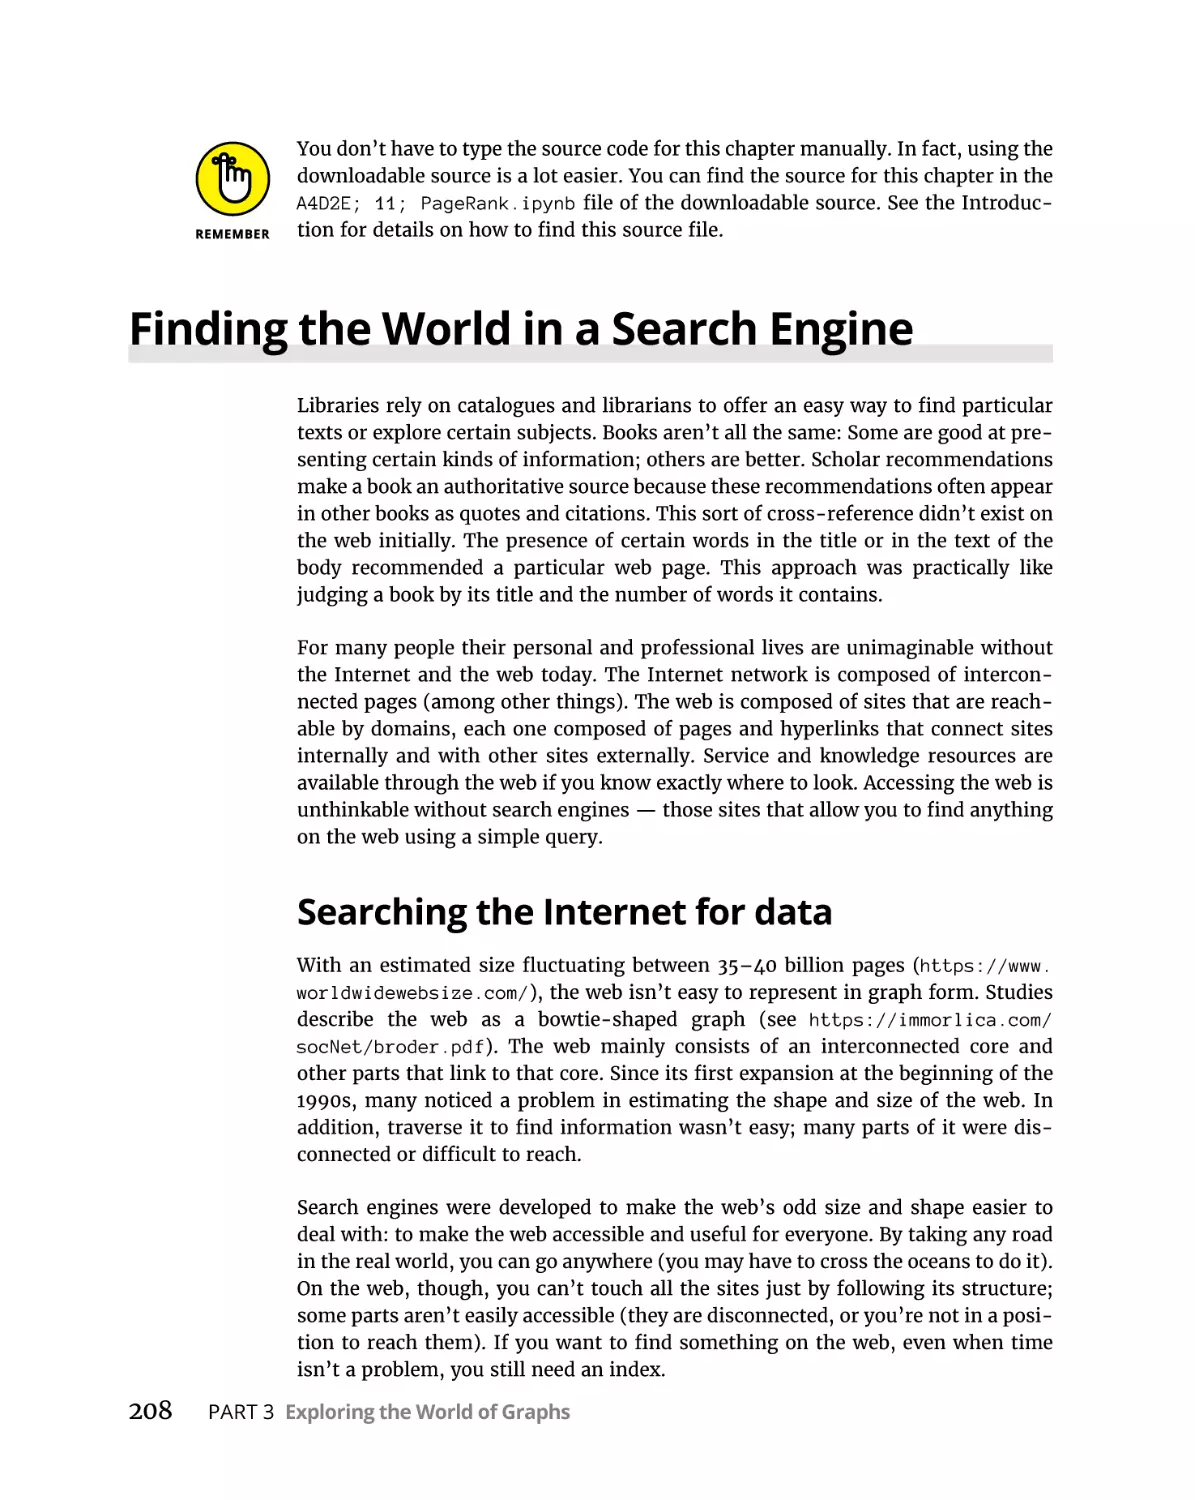 Finding the World in a Search Engine
Searching the Internet for data